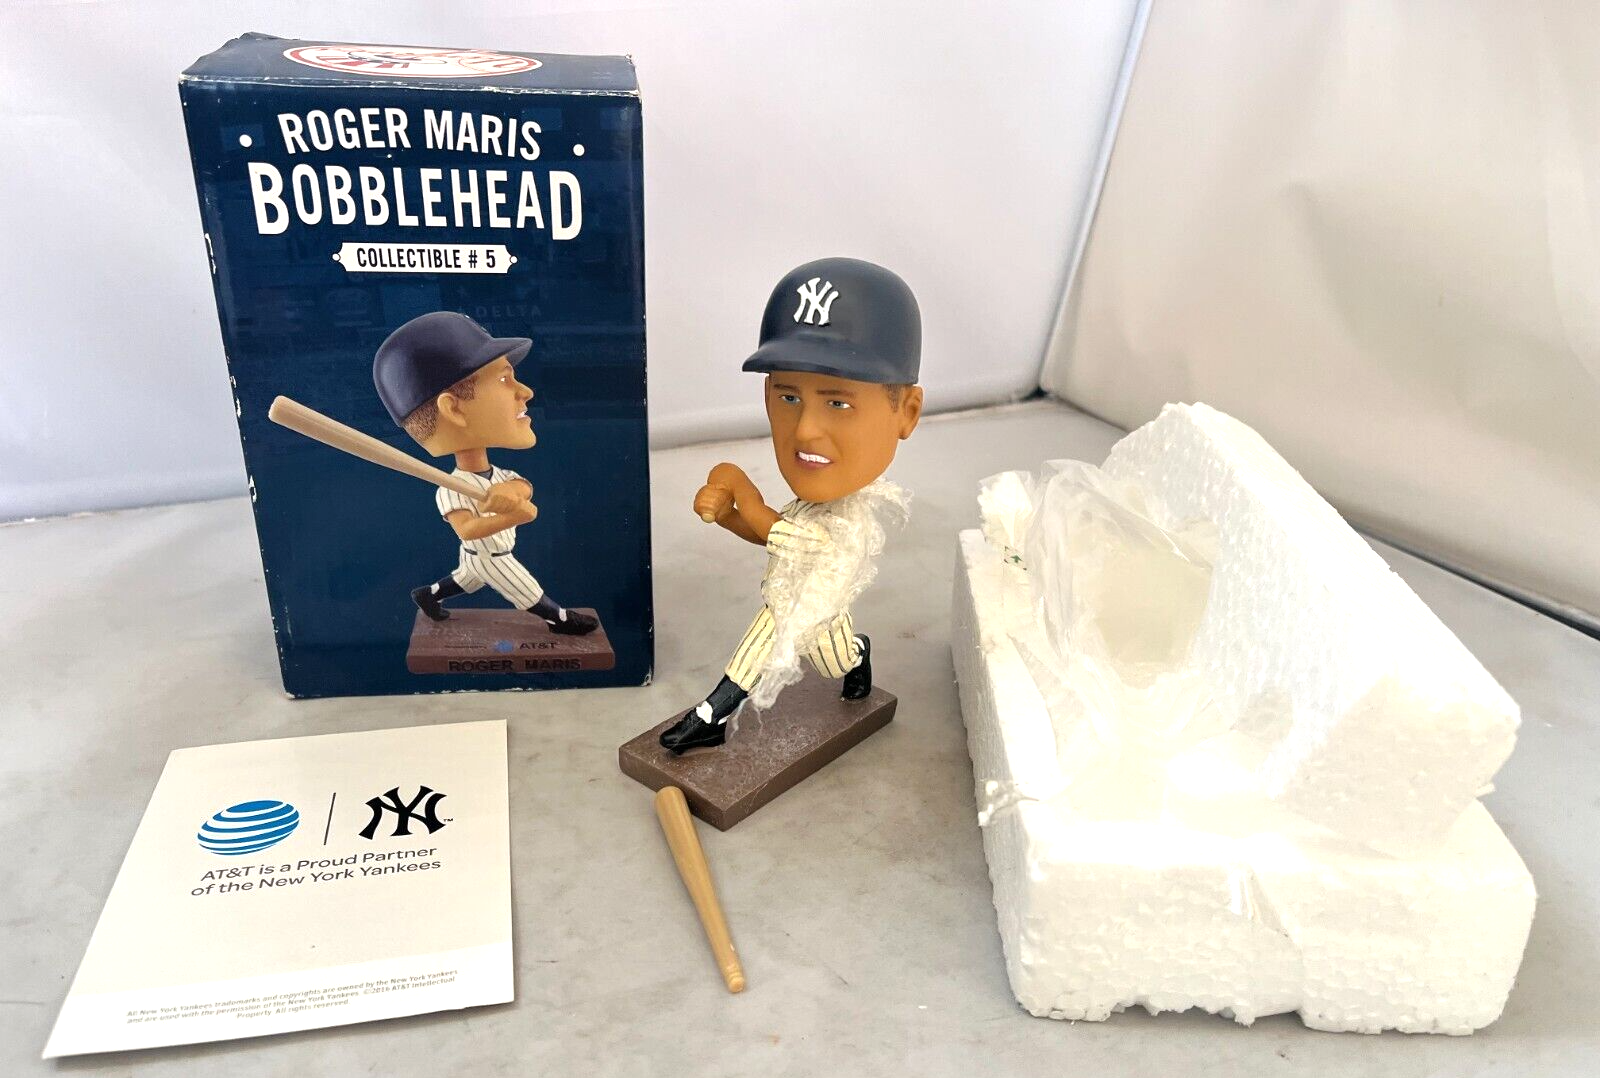 Primary image for Roger Maris 2016 New York Yankees Bobblehead SGA Limited Edition #5 of 5